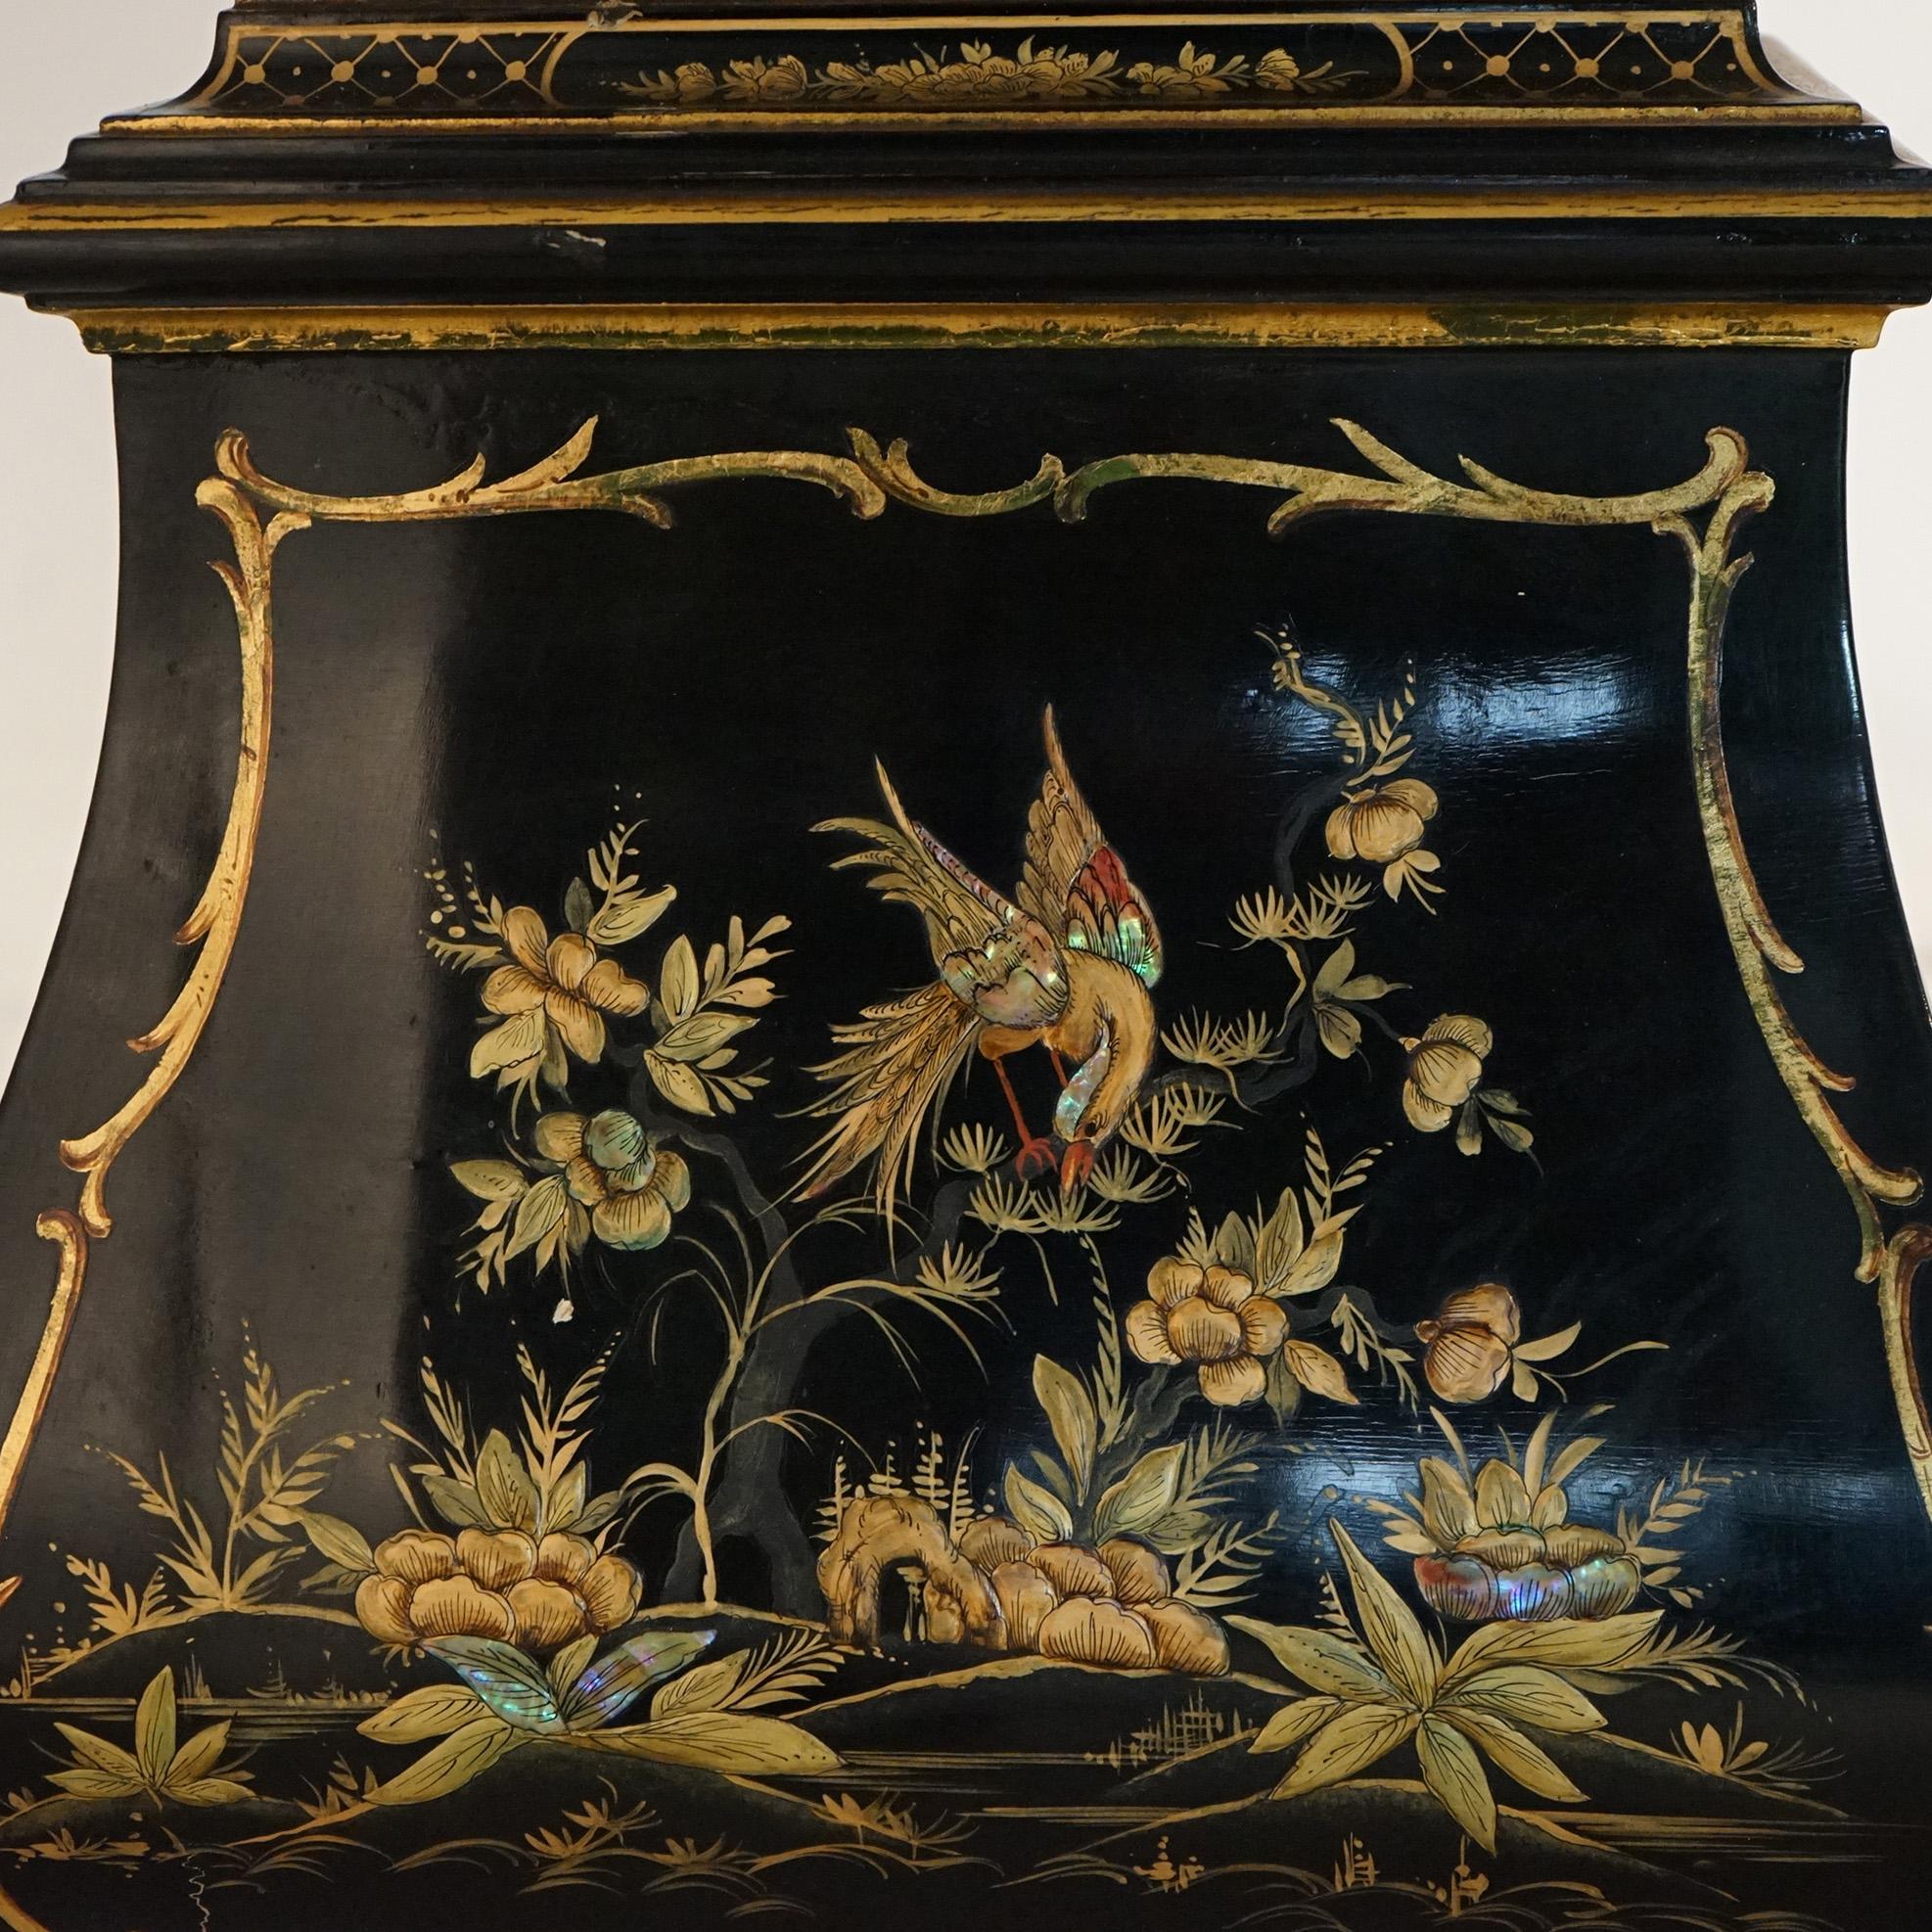 ***Ask About Reduced In-House Shipping Rates - Reliable Service & Fully Insured***
A German petite tall case clock offers bombe base, black lacquer finish with gilt chinoiserie decoration throughout, and maker stamp with serial number as